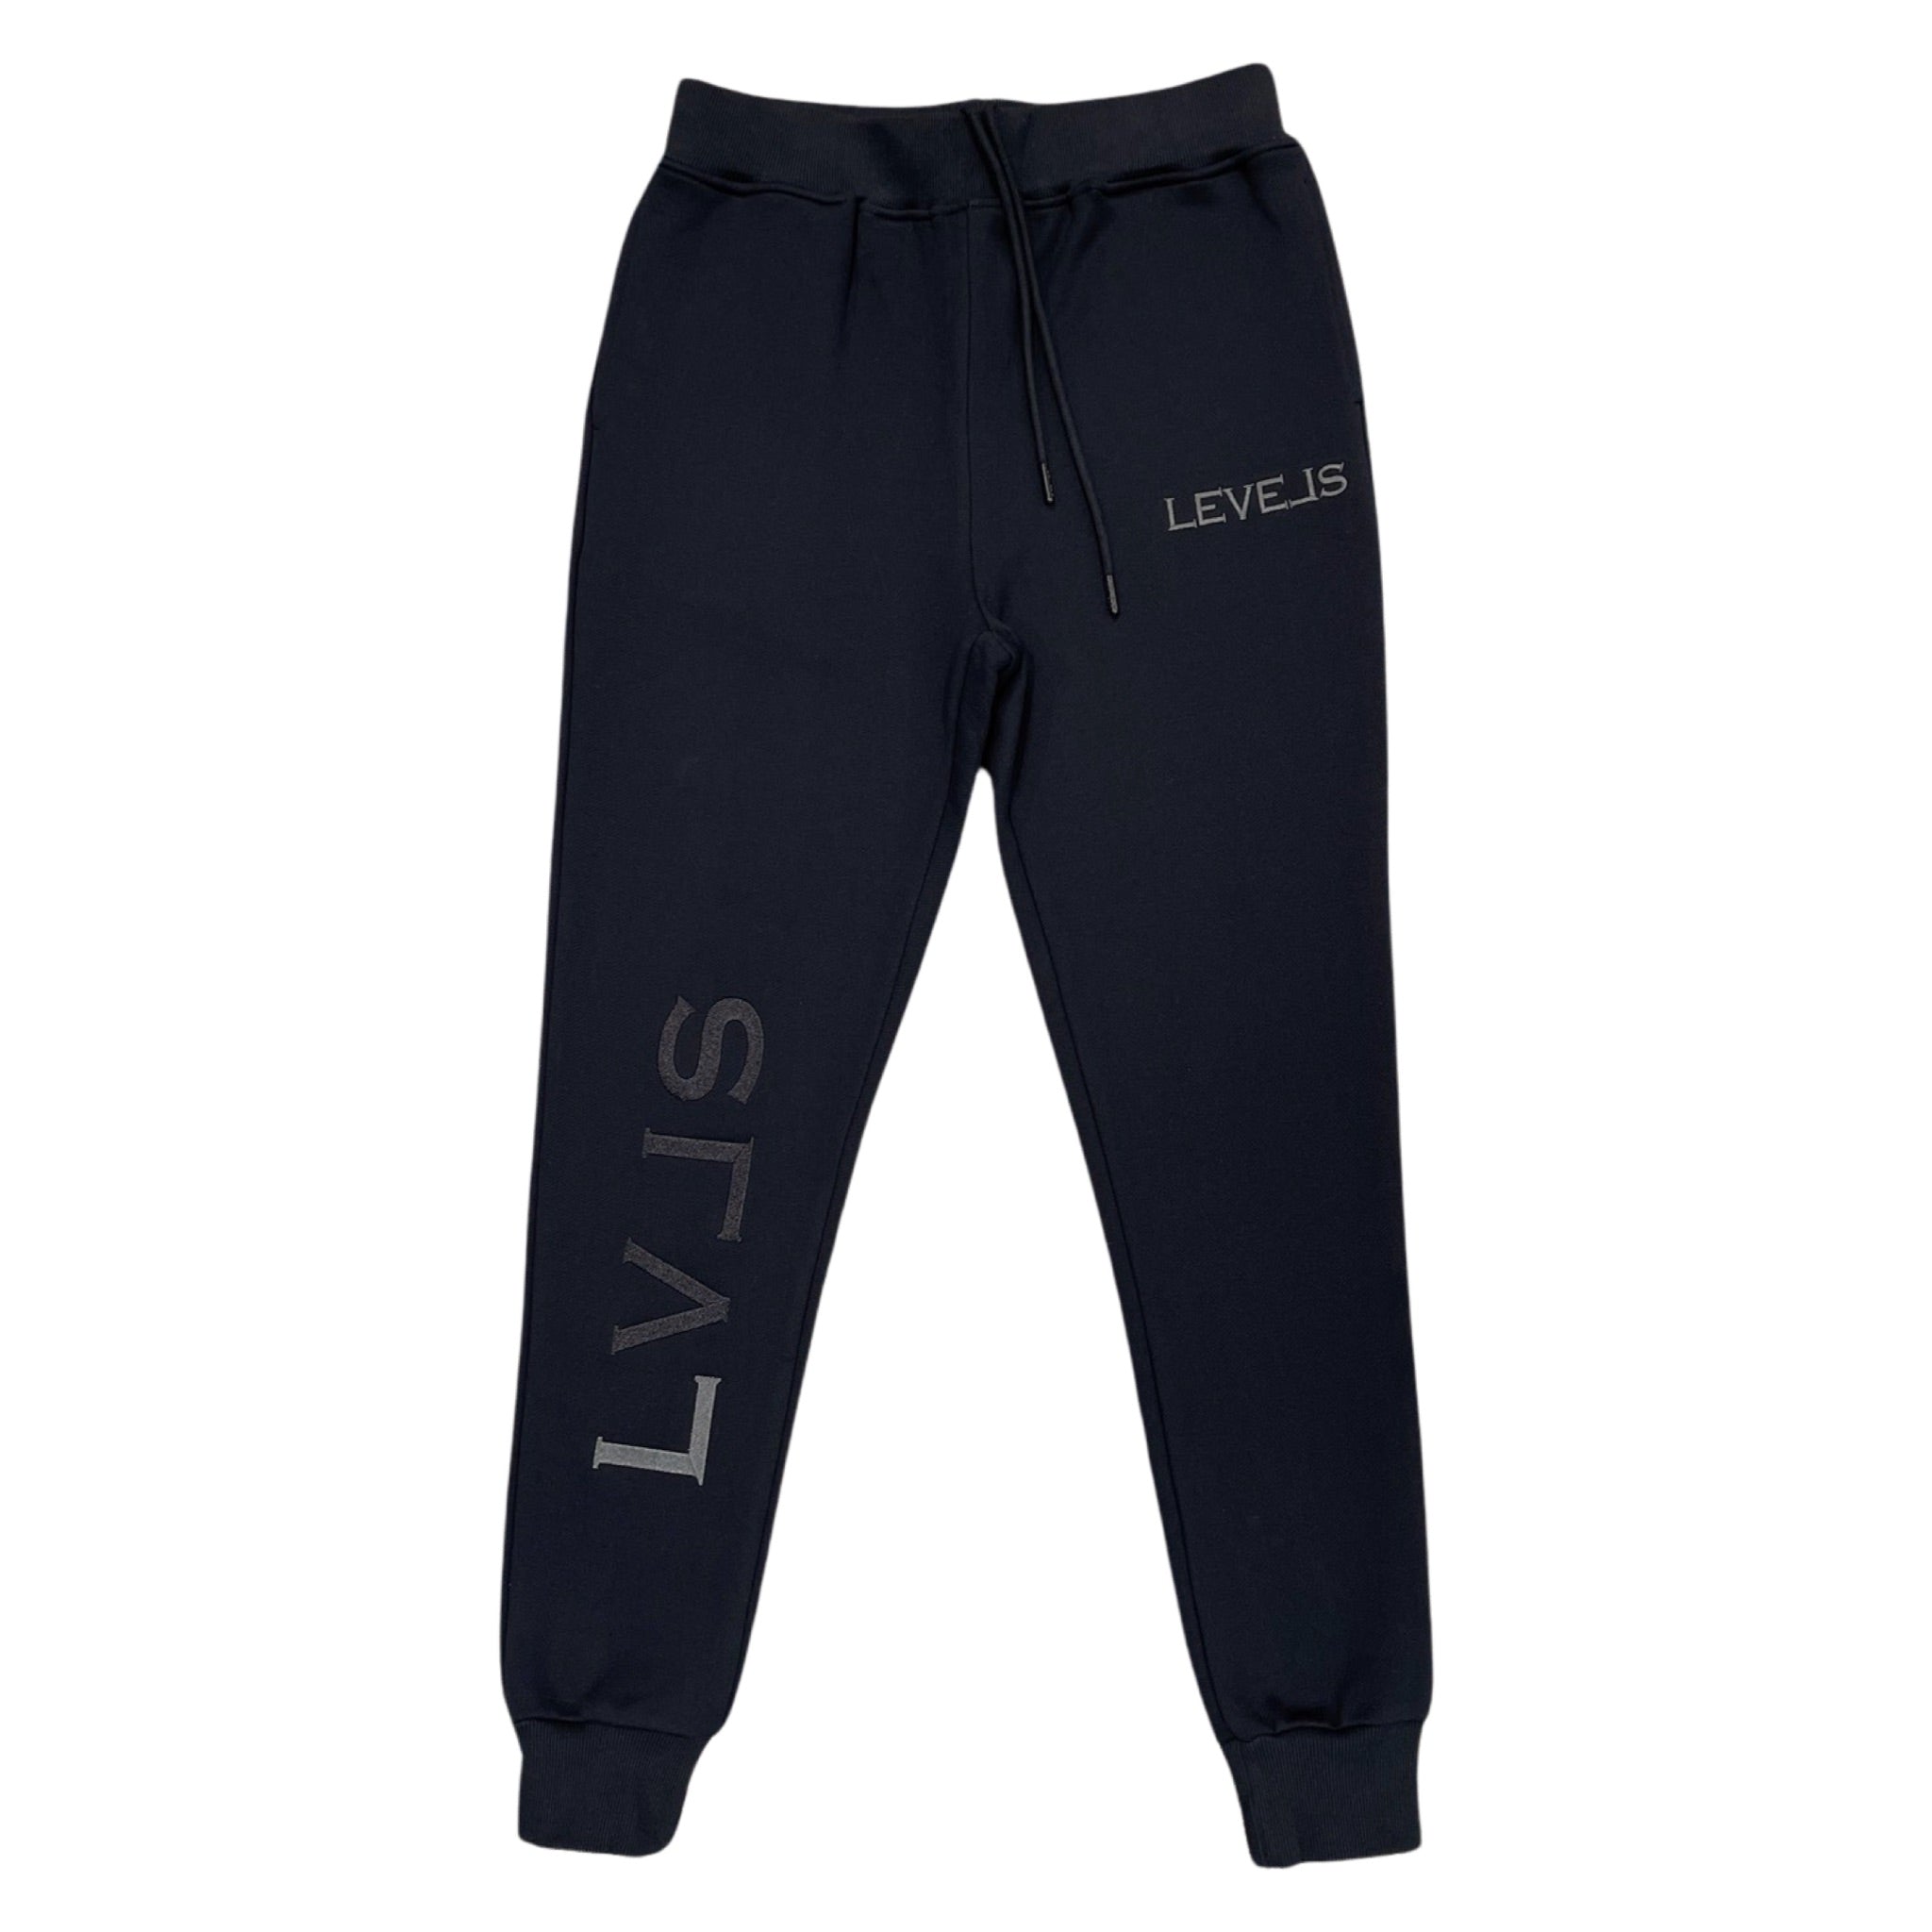 LEVELS, LLC Apparel & Accessories LUXE LVLS EMBROIDERED JOGGERS (ONYX)